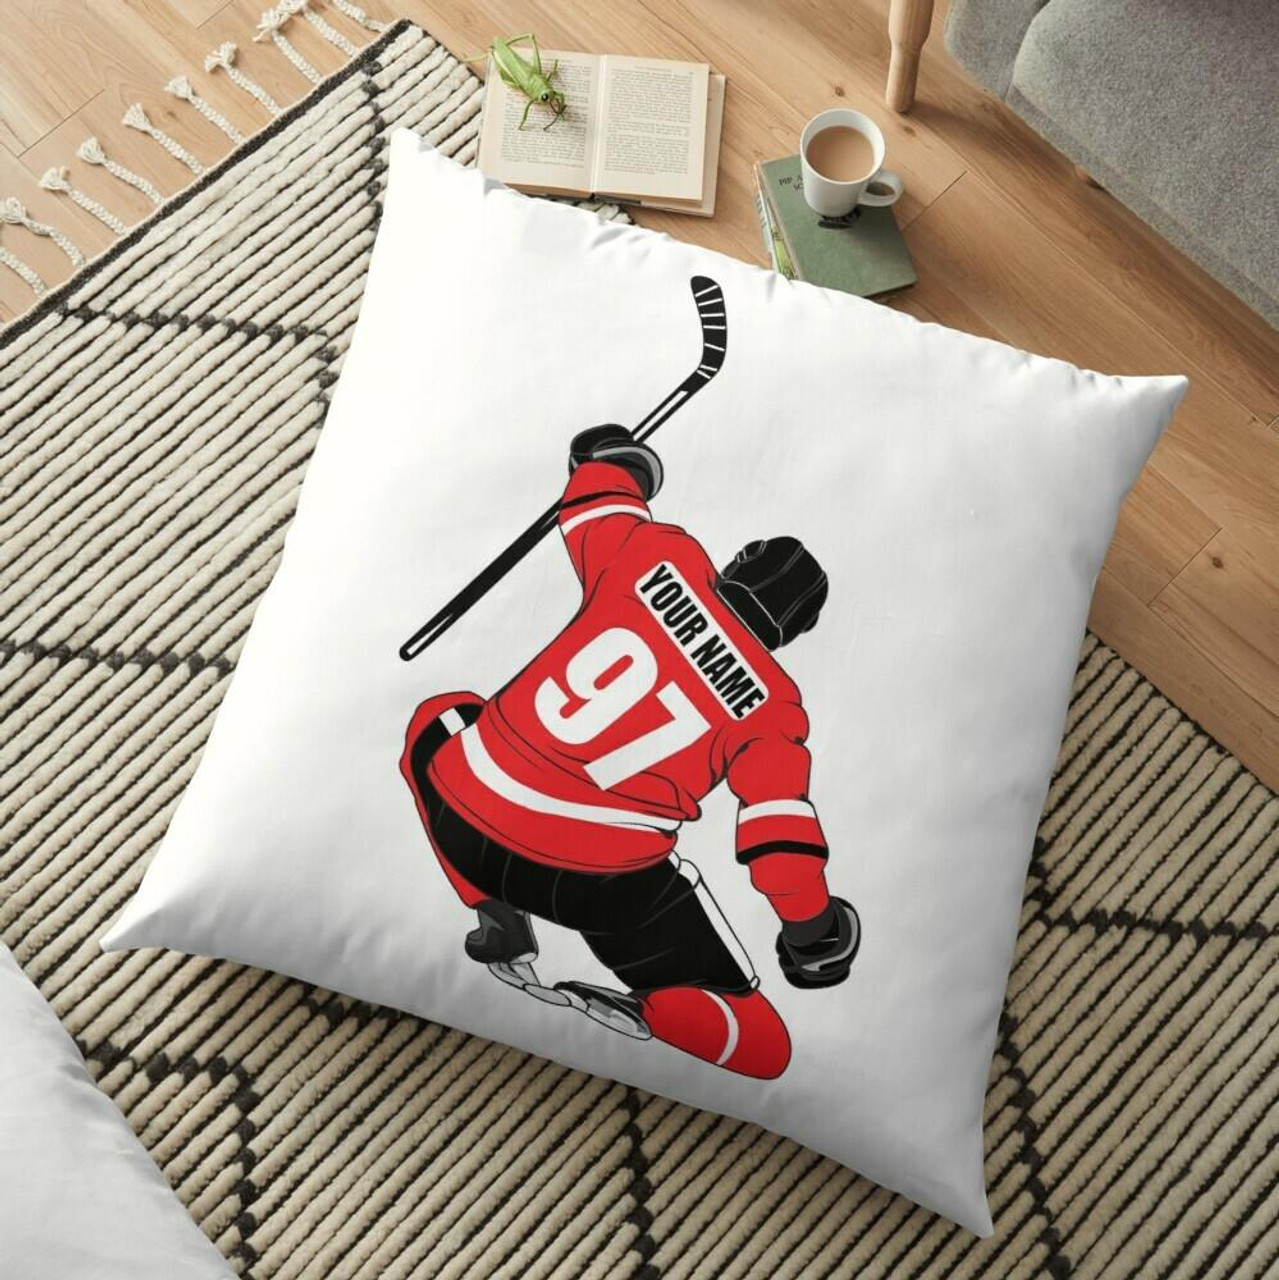 https://cdn11.bigcommerce.com/s-fgahe43b/images/stencil/1280x1280/products/850/10498/stinky-lockers-personalized-hockey-floor-pillow-cover__62147.1655049380.jpg?c=2